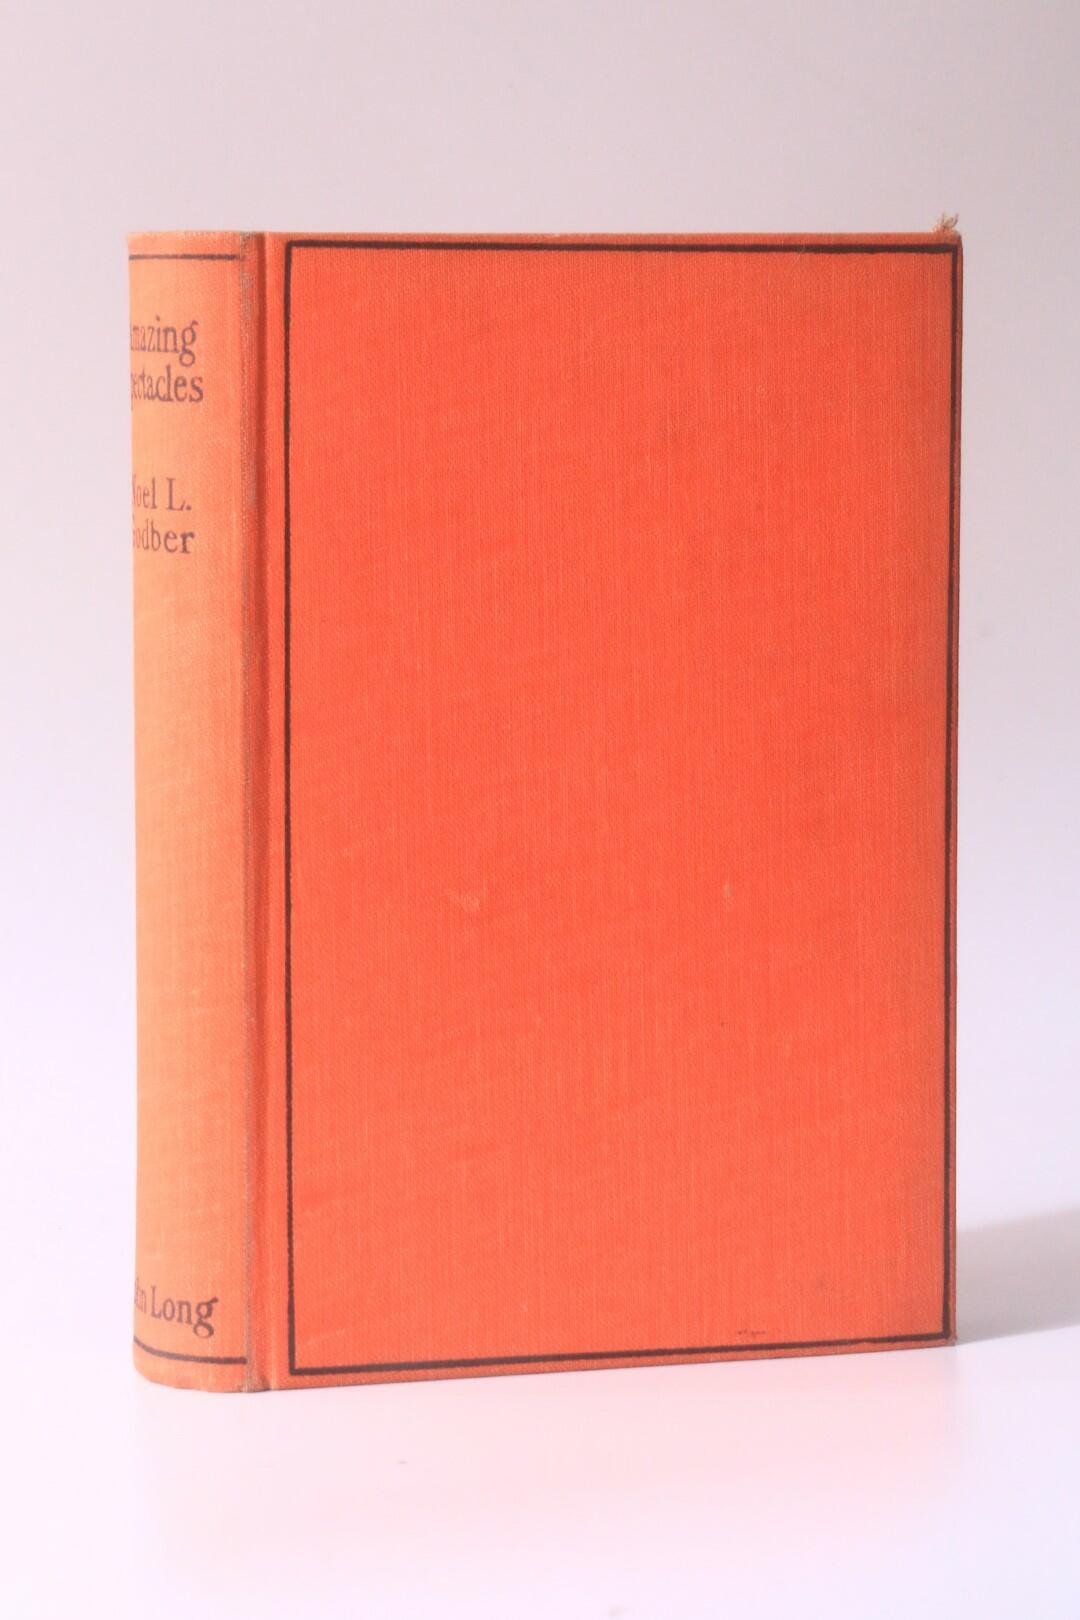 Noel Godber - Amazing Spectacles! - John Long, 1931, First Edition.